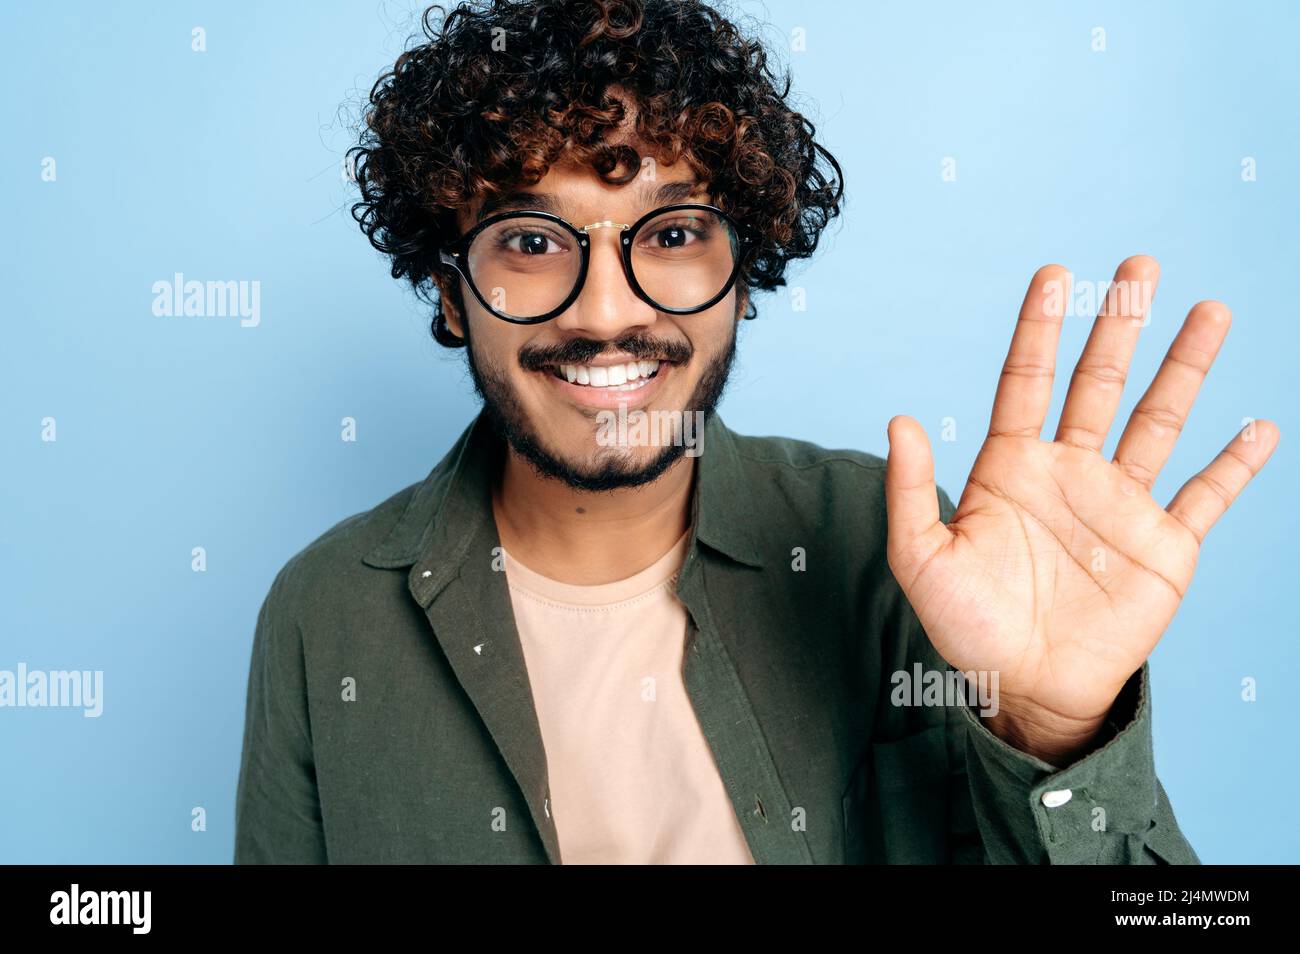 Close-up of charismatic attractive positive curly indian or arabian guy in casual shirt with glasses, looking at camera, smiling happily, waving, greeting gesture, stand on an isolated blue background Stock Photo